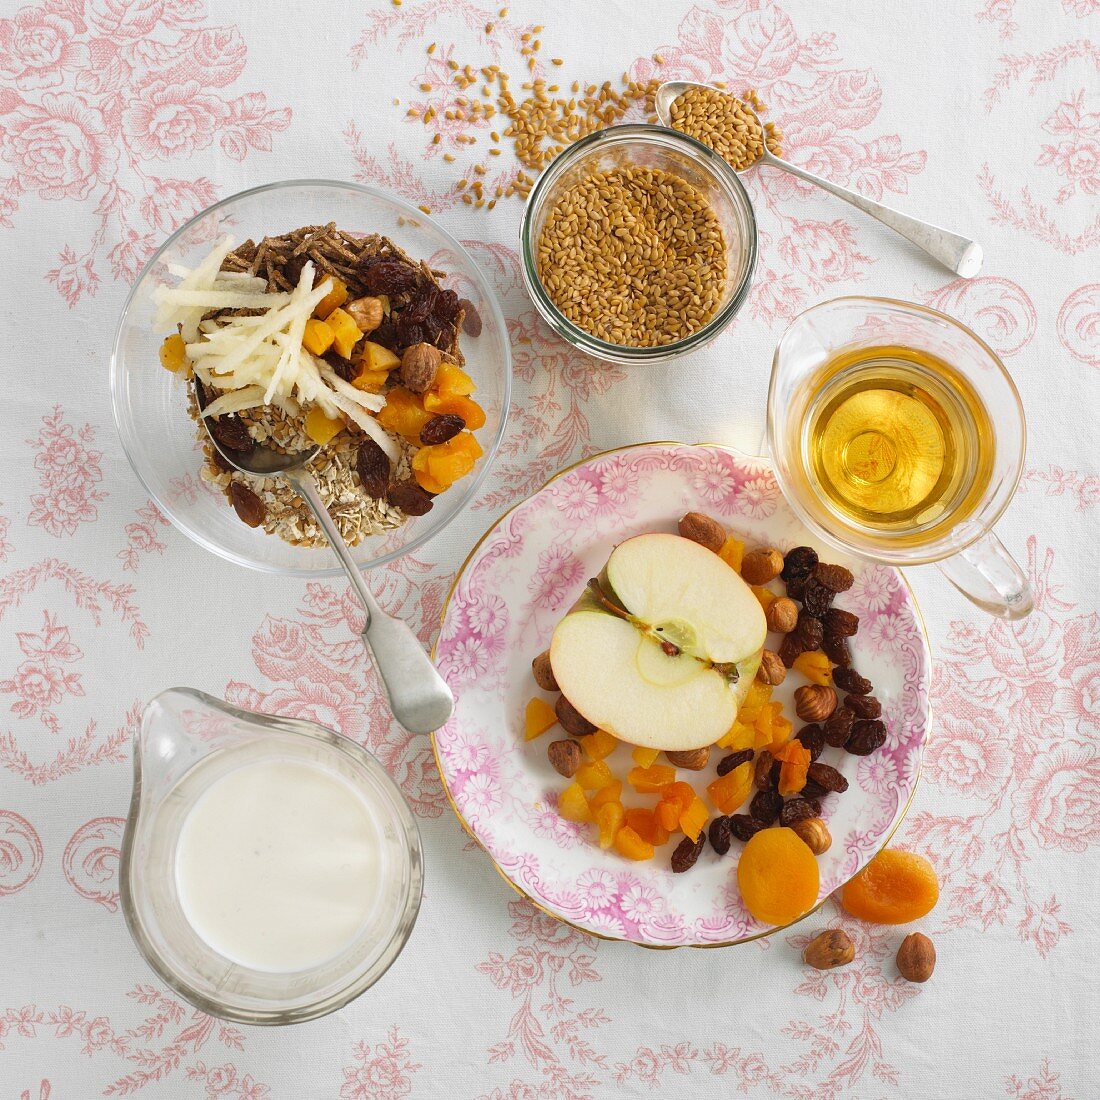 Bircher muesli with apple and dried fruits